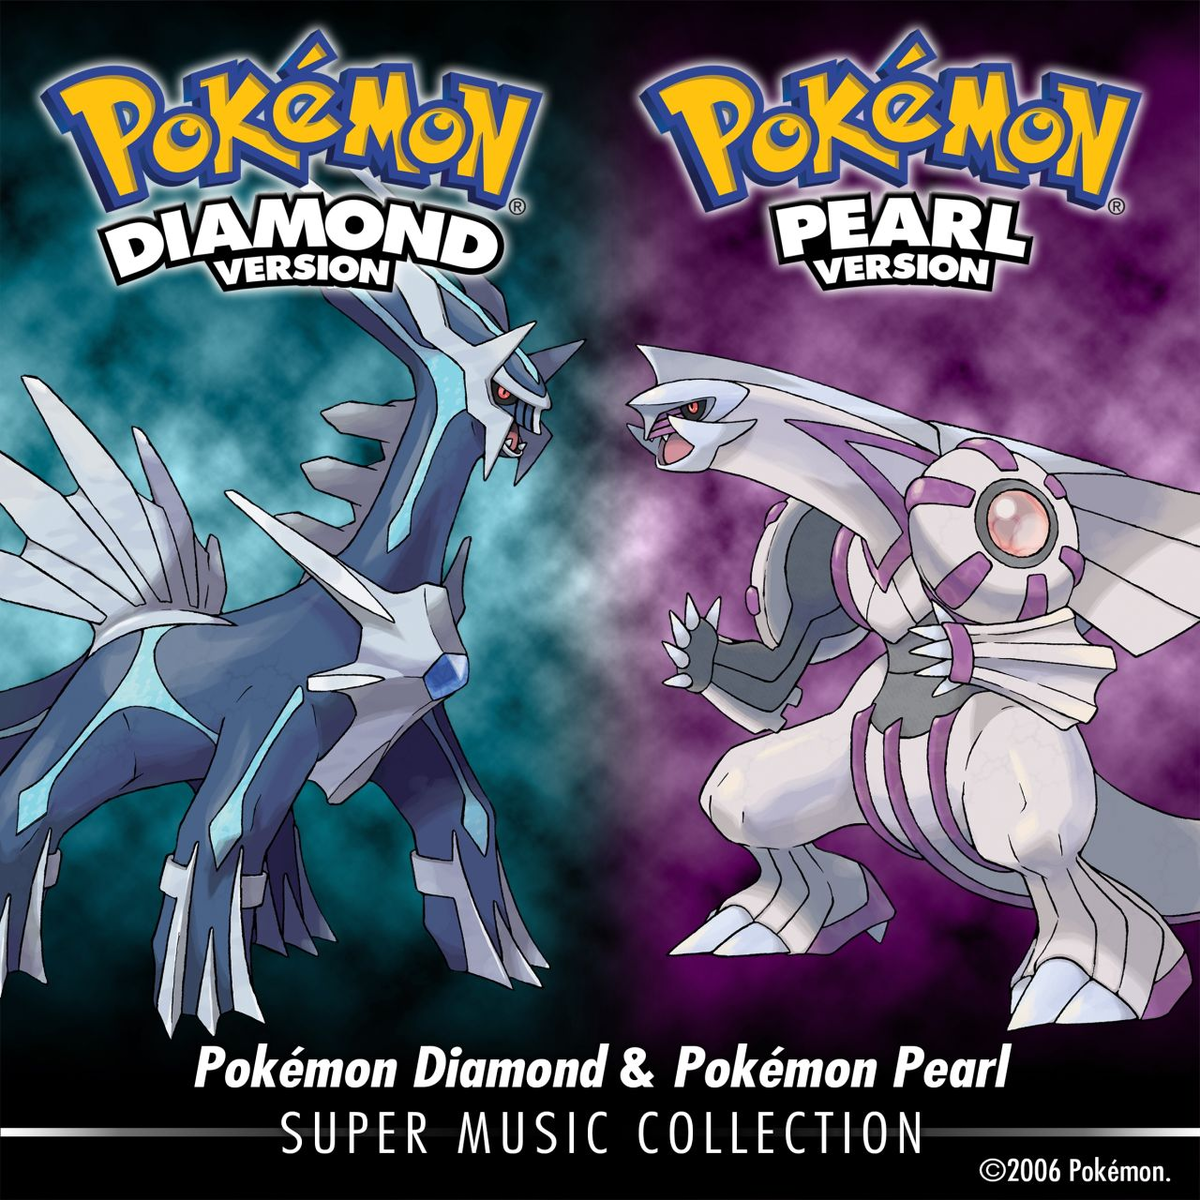 Pokemon diamond and pearl games free download for android emulator